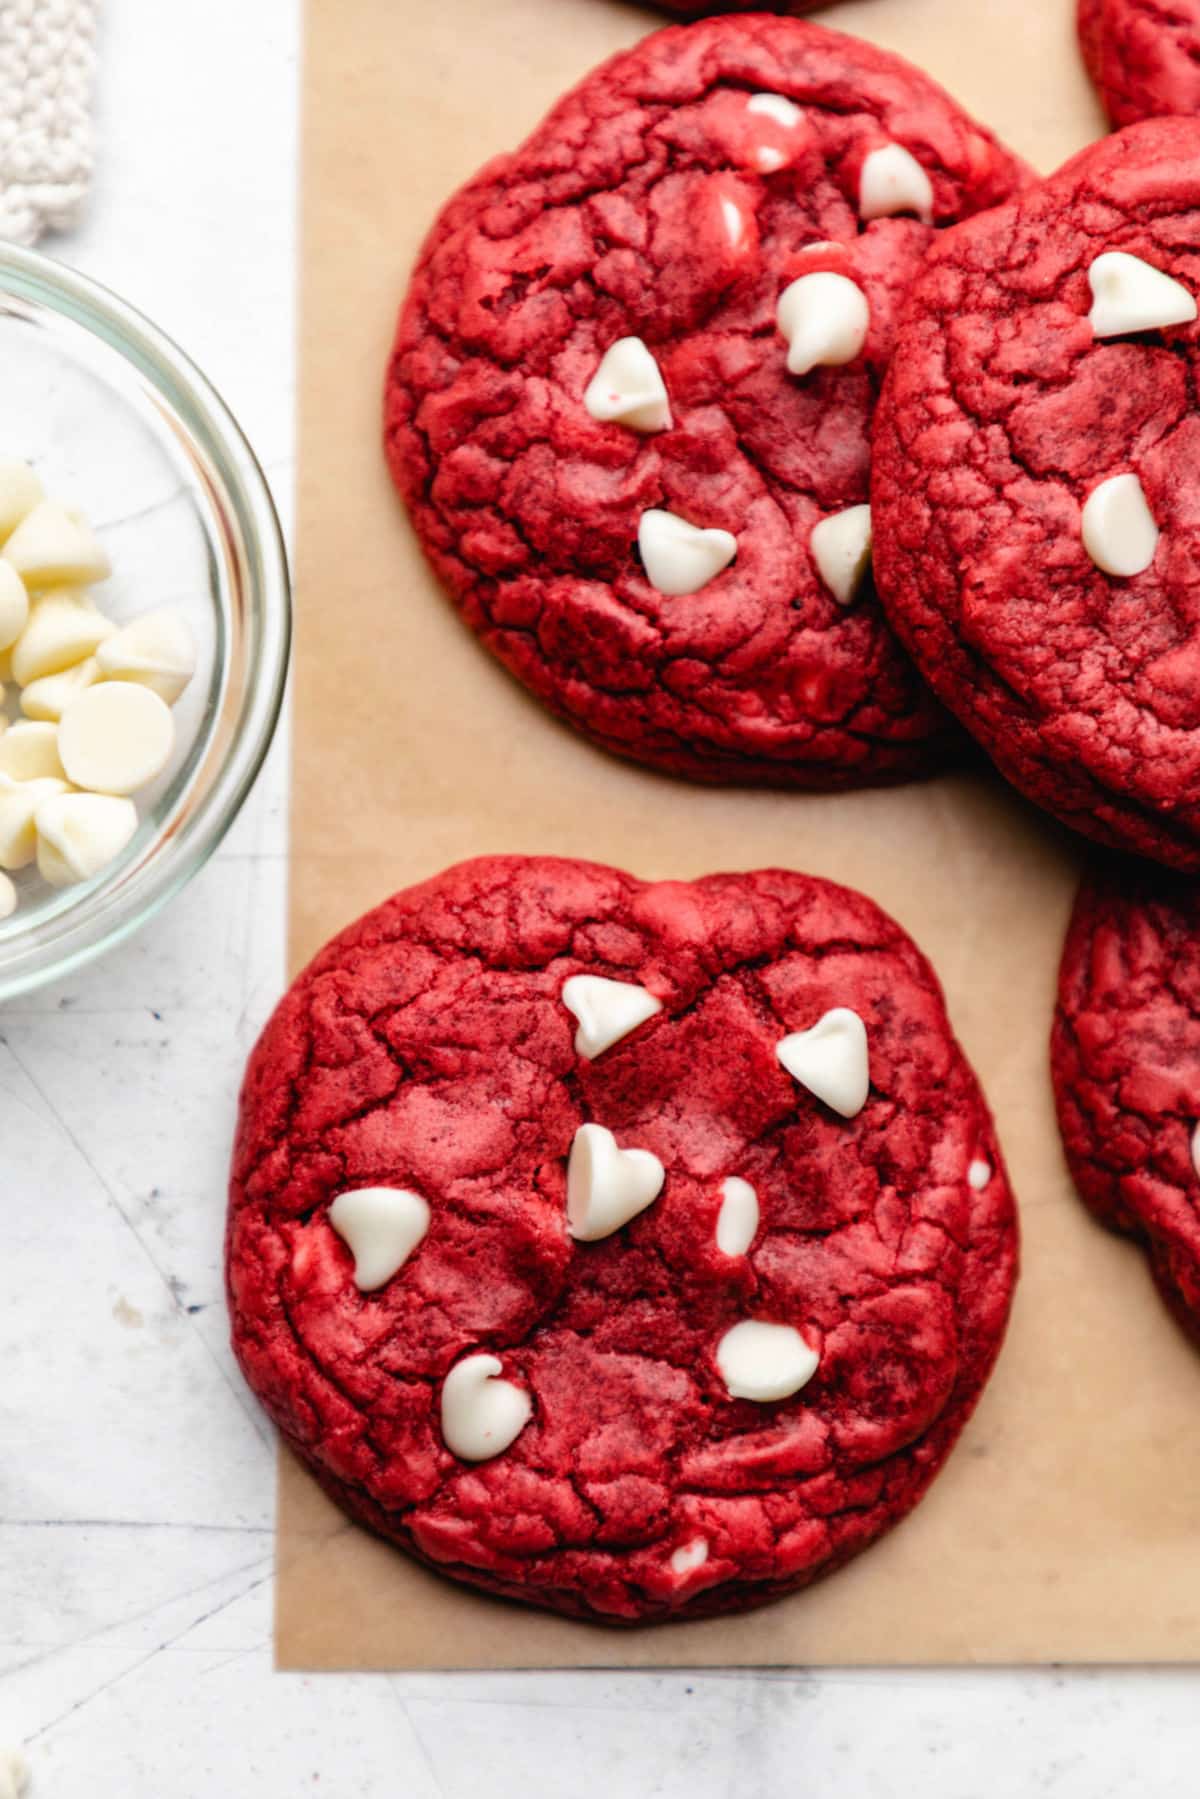 A red velvet cookie next to a stack of red velvet cookies.